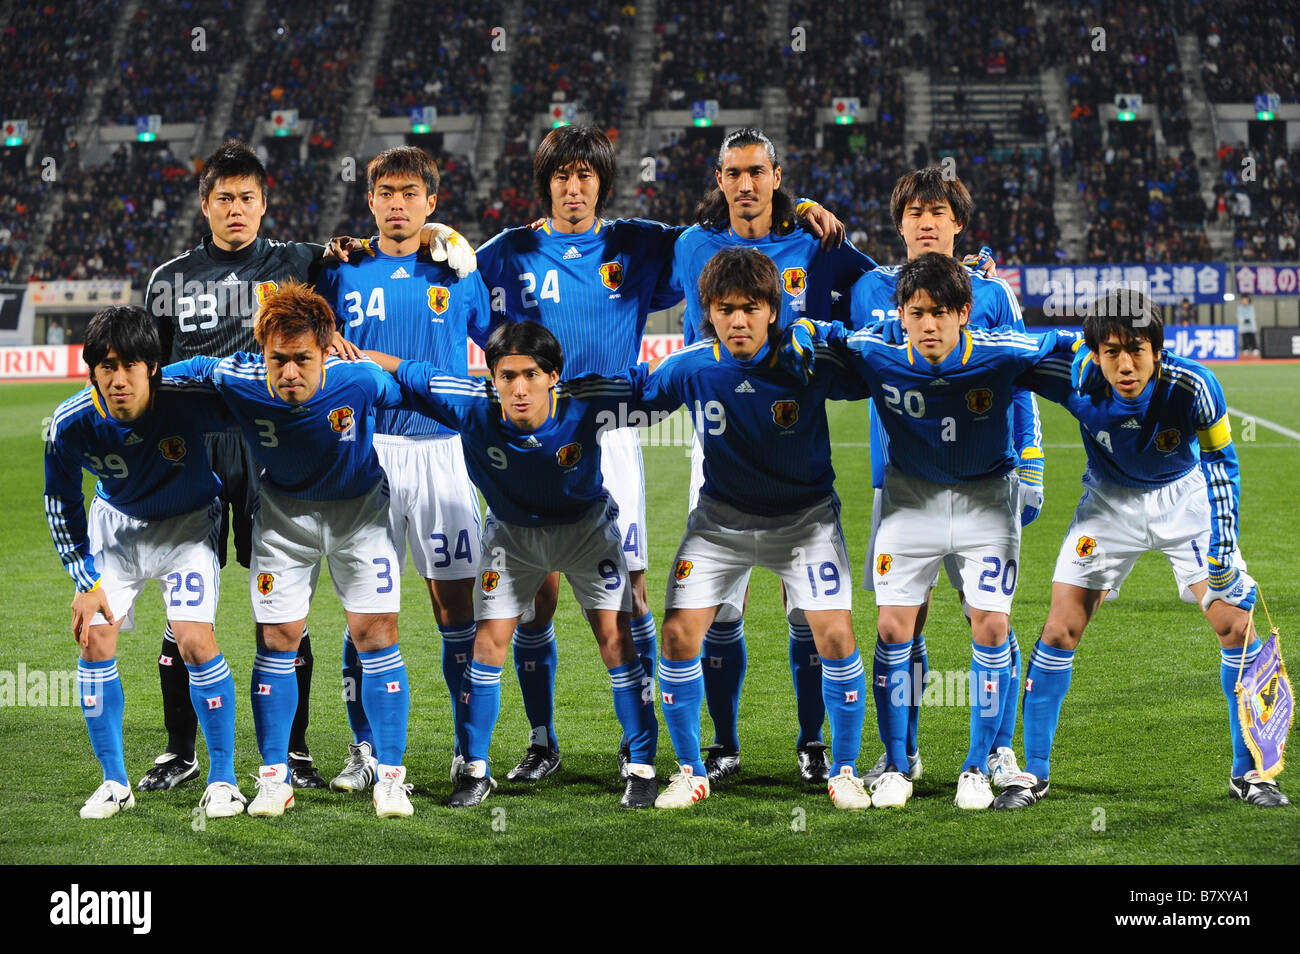 Japan national team group line up JPN JANUARY 20 2009 Football During the AFC Asian Cup 2011 Qualifying round Group A match between Japan 2 1 Yemen at KK Wing Stadium in Kumamoto Japan Photo by Jinten Sawada AFLO 0786 Stock Photo